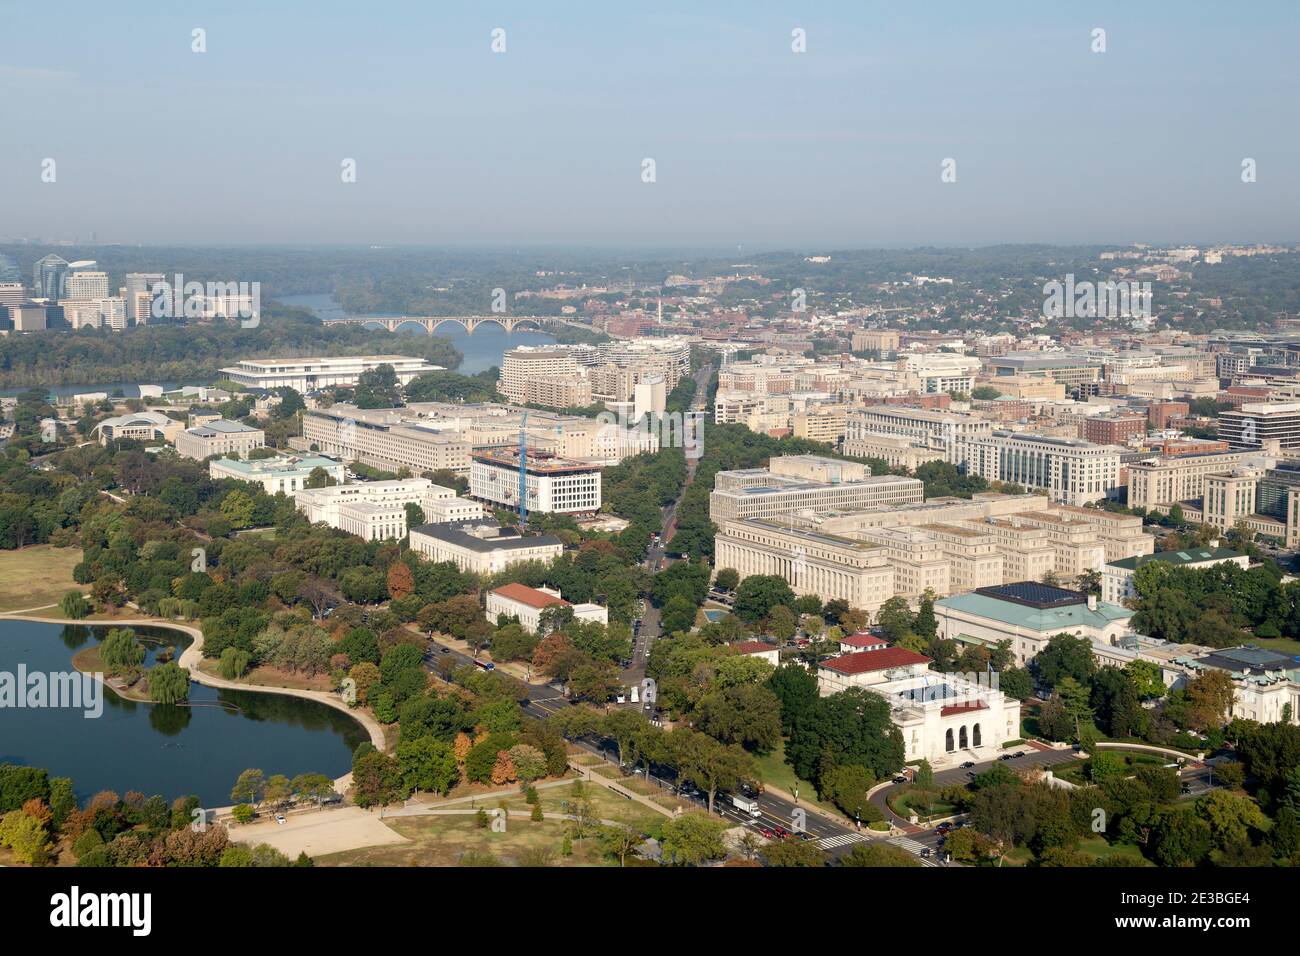 Governmental buildings in Washington DC, USA. The buildings stand near the Potomac River and Constitution Gardens. Stock Photo